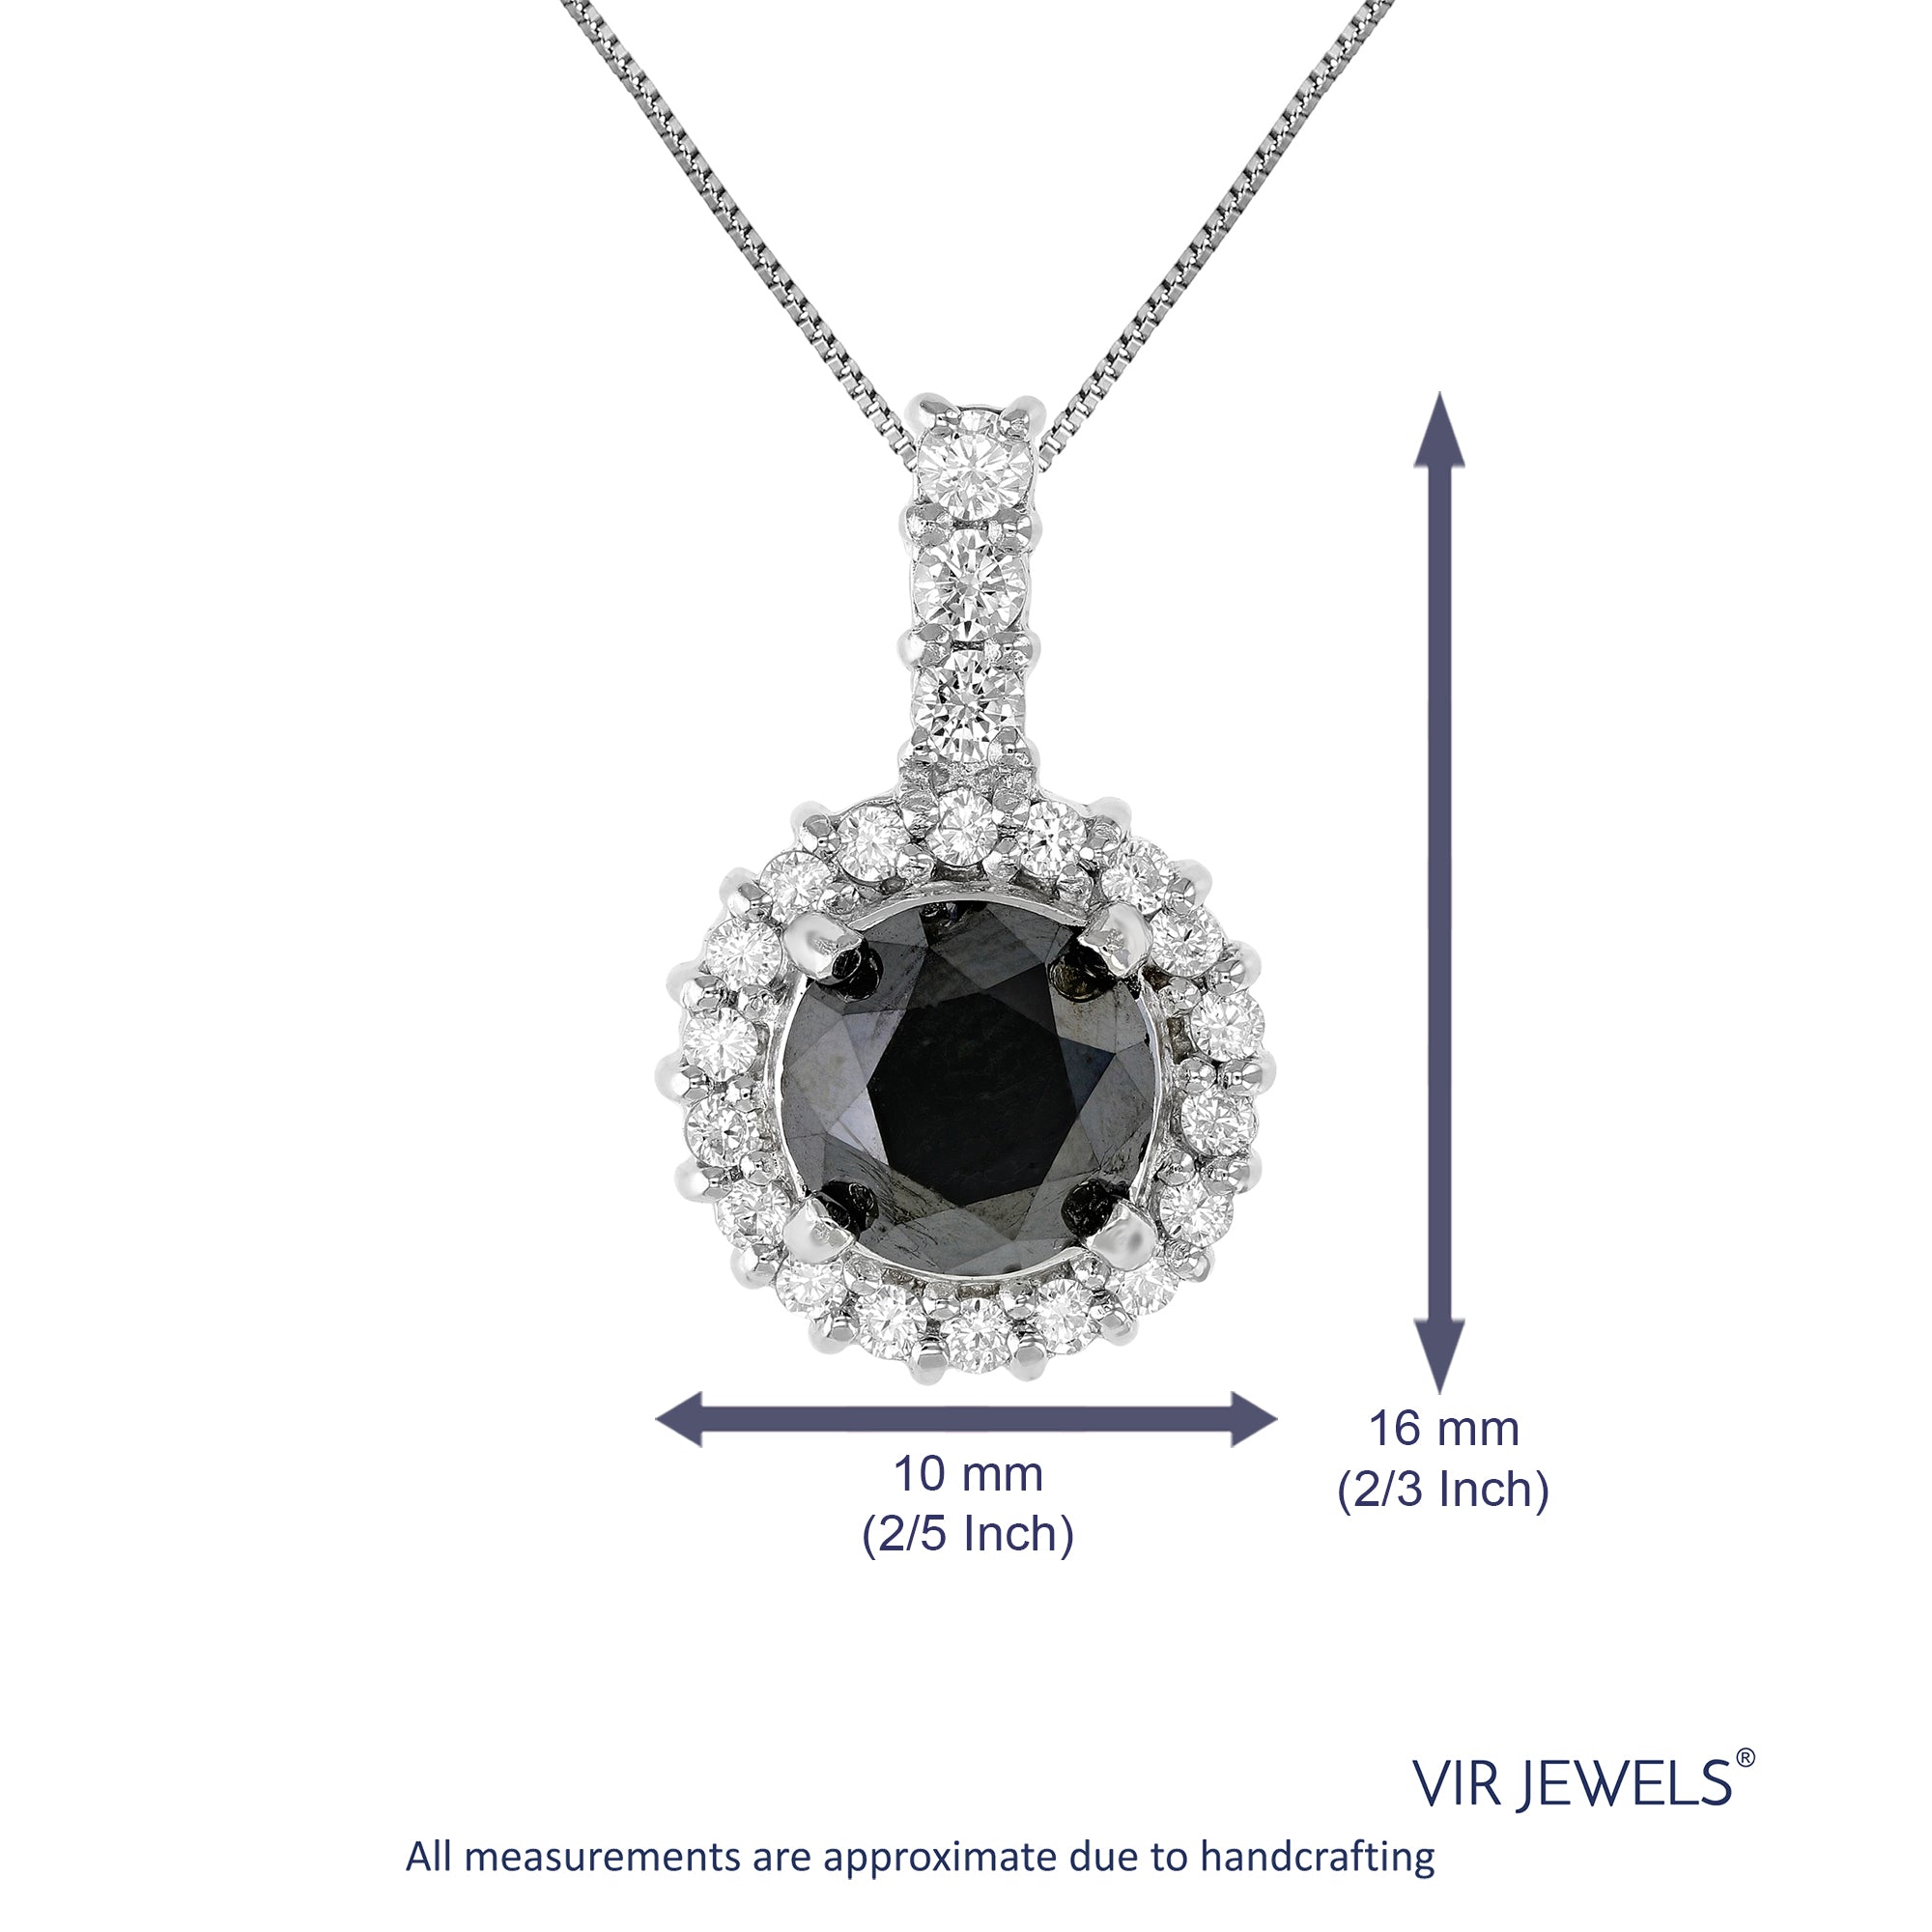 1.50 cttw Diamond Pendant, Black and White Diamond Solitaire Pendant Necklace for Women in .925 Sterling Silver with Rhodium, 18 Inch Chain, Prong Setting